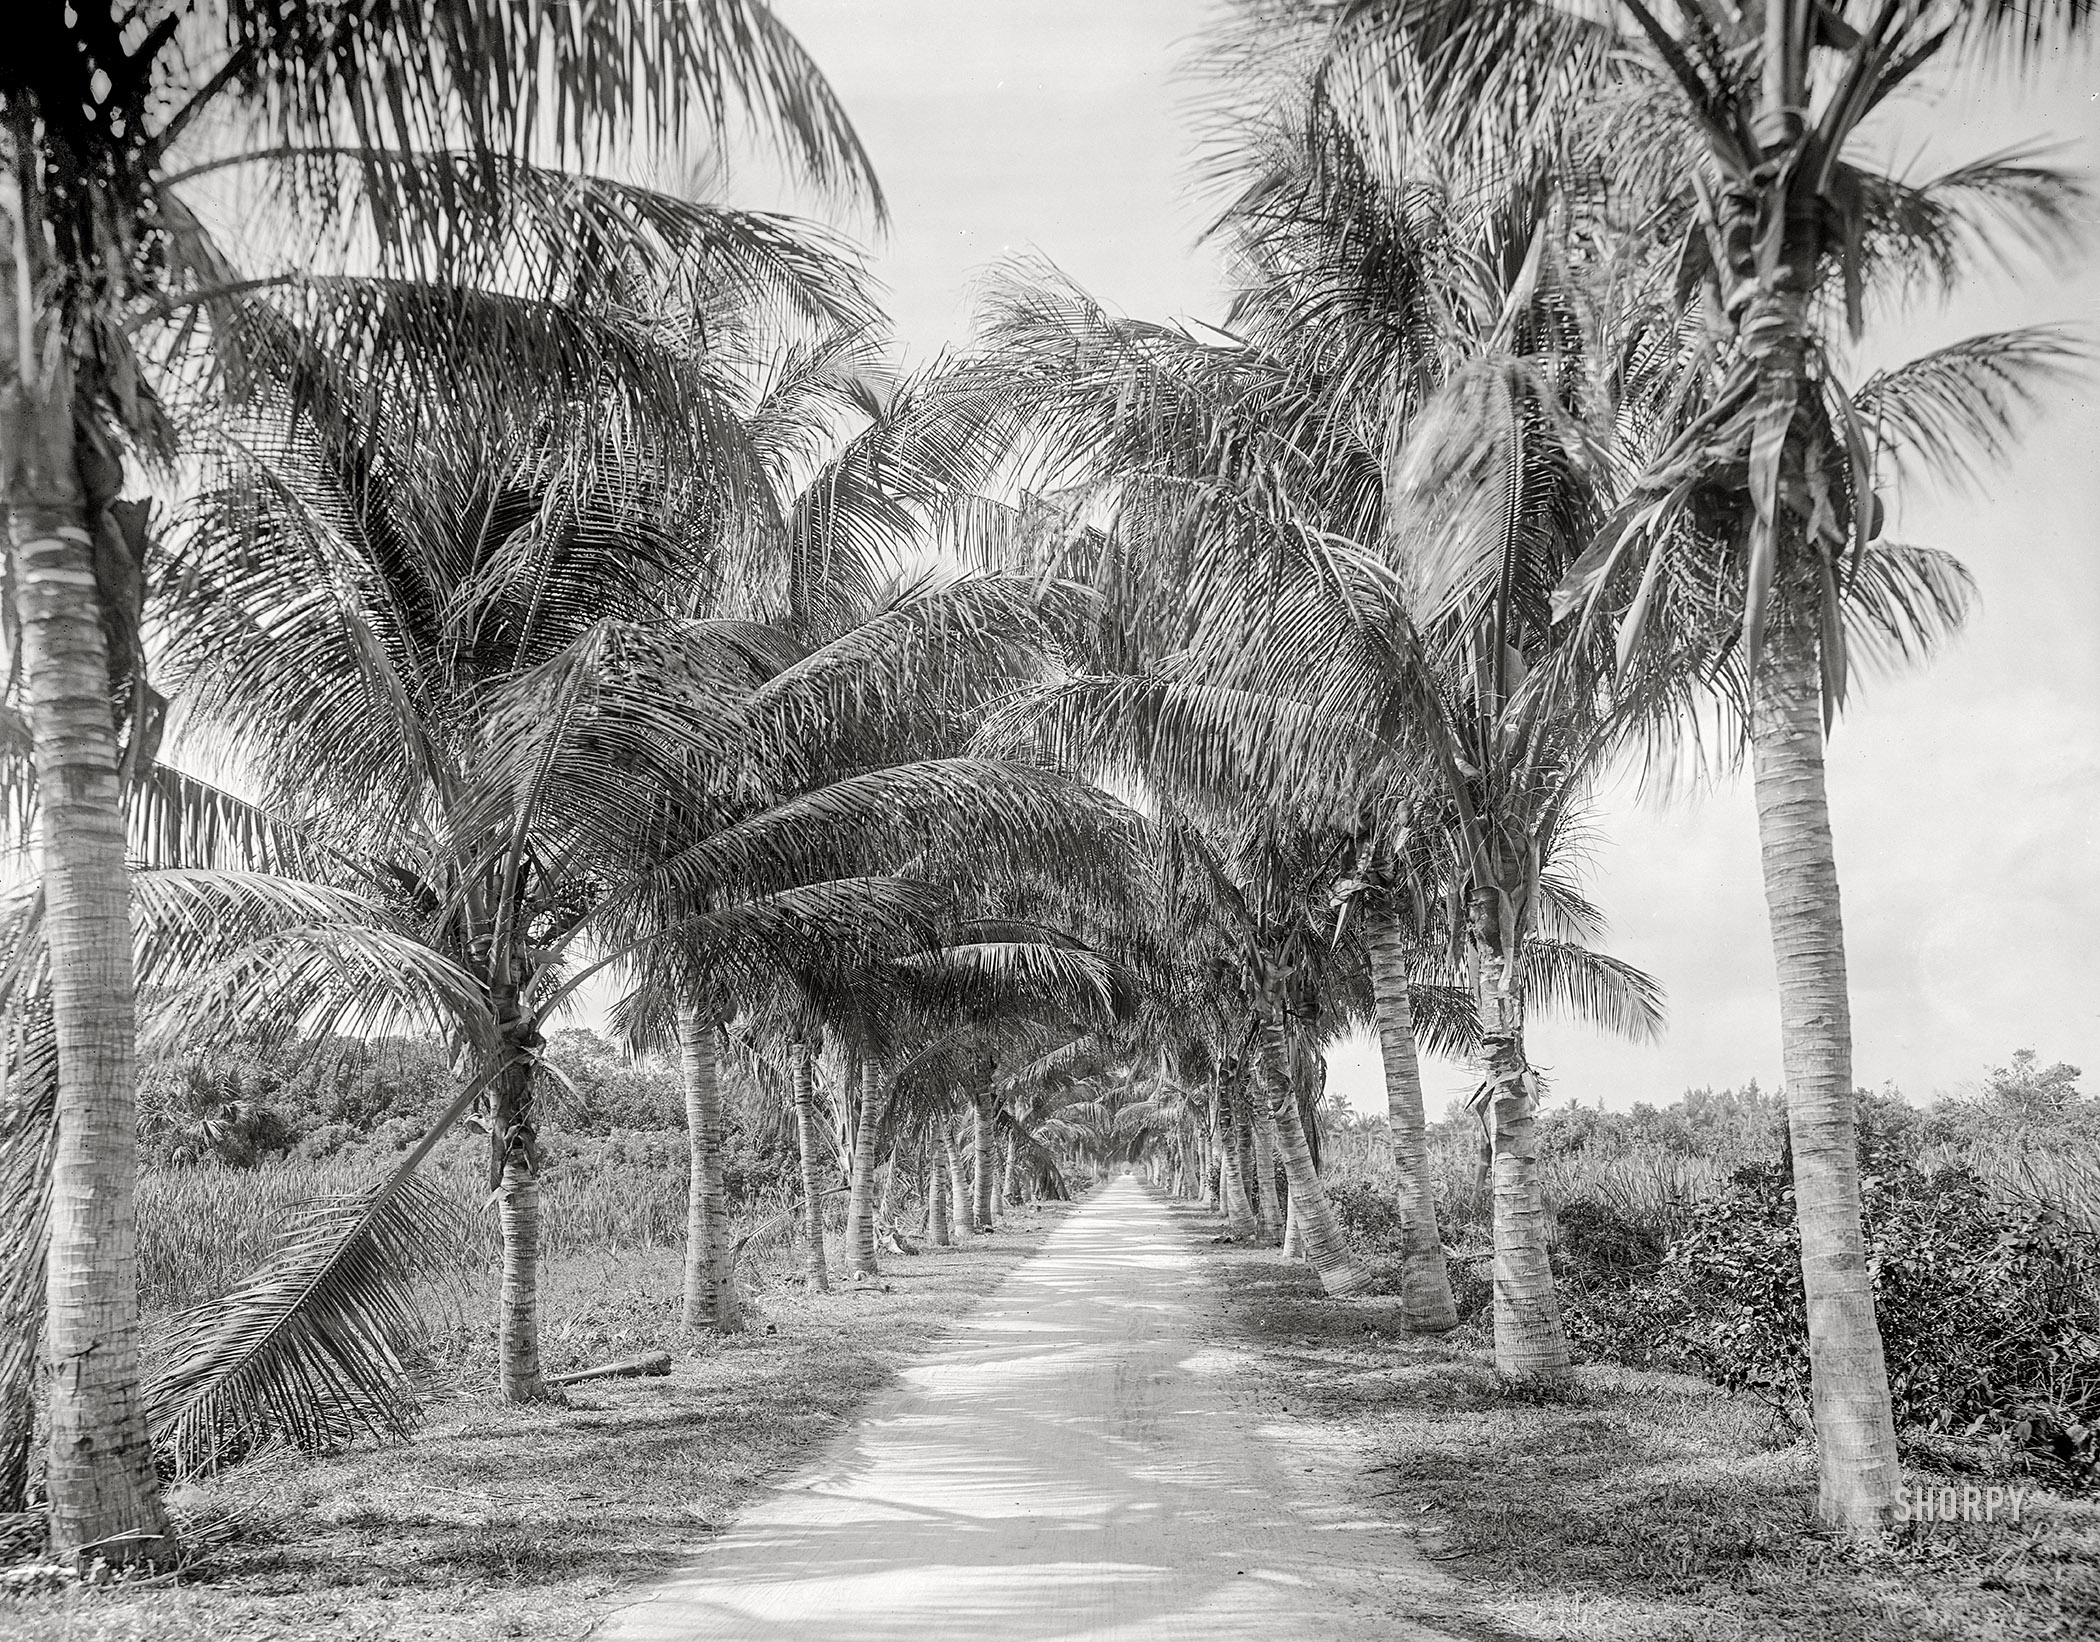 Circa 1910. "The road to the jungle. Palm Beach, Fla." 8x10 inch dry plate glass negative, Detroit Publishing Company. View full size.